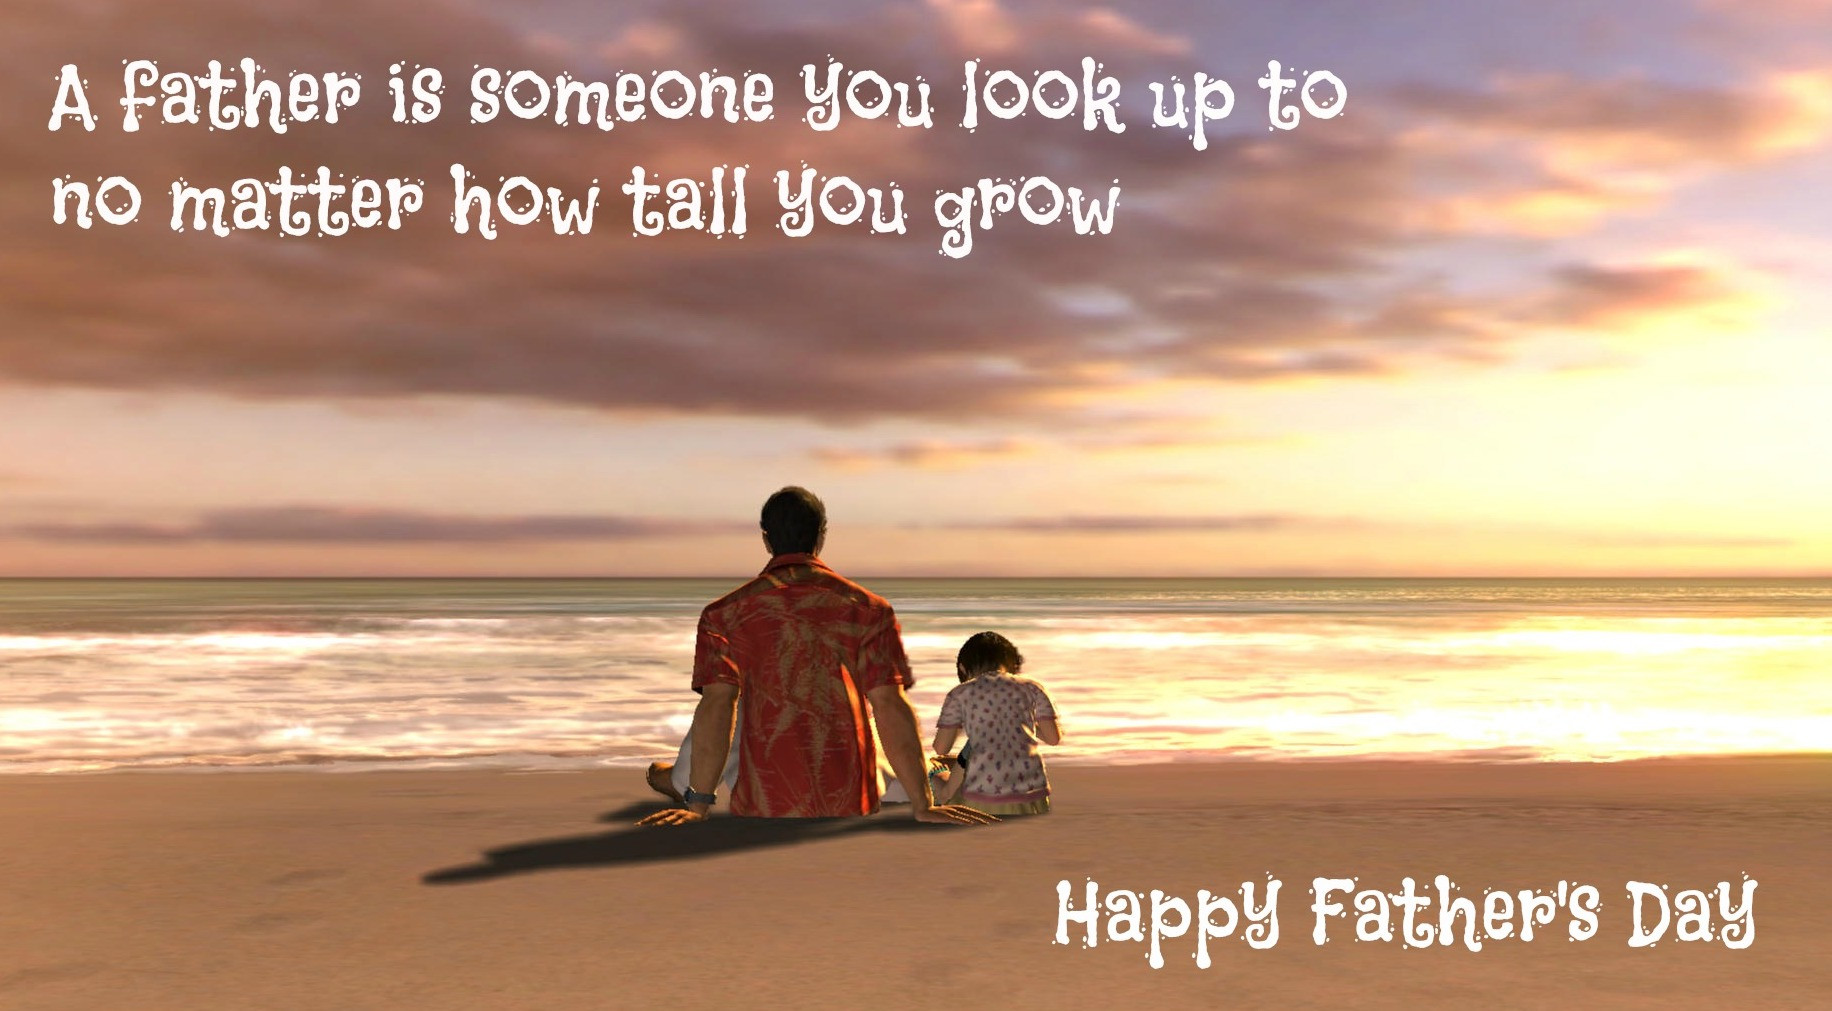 Happy Fathers Day Quotes From Son
 15 Best Happy Father s Day Quotes & Sayings from Son in